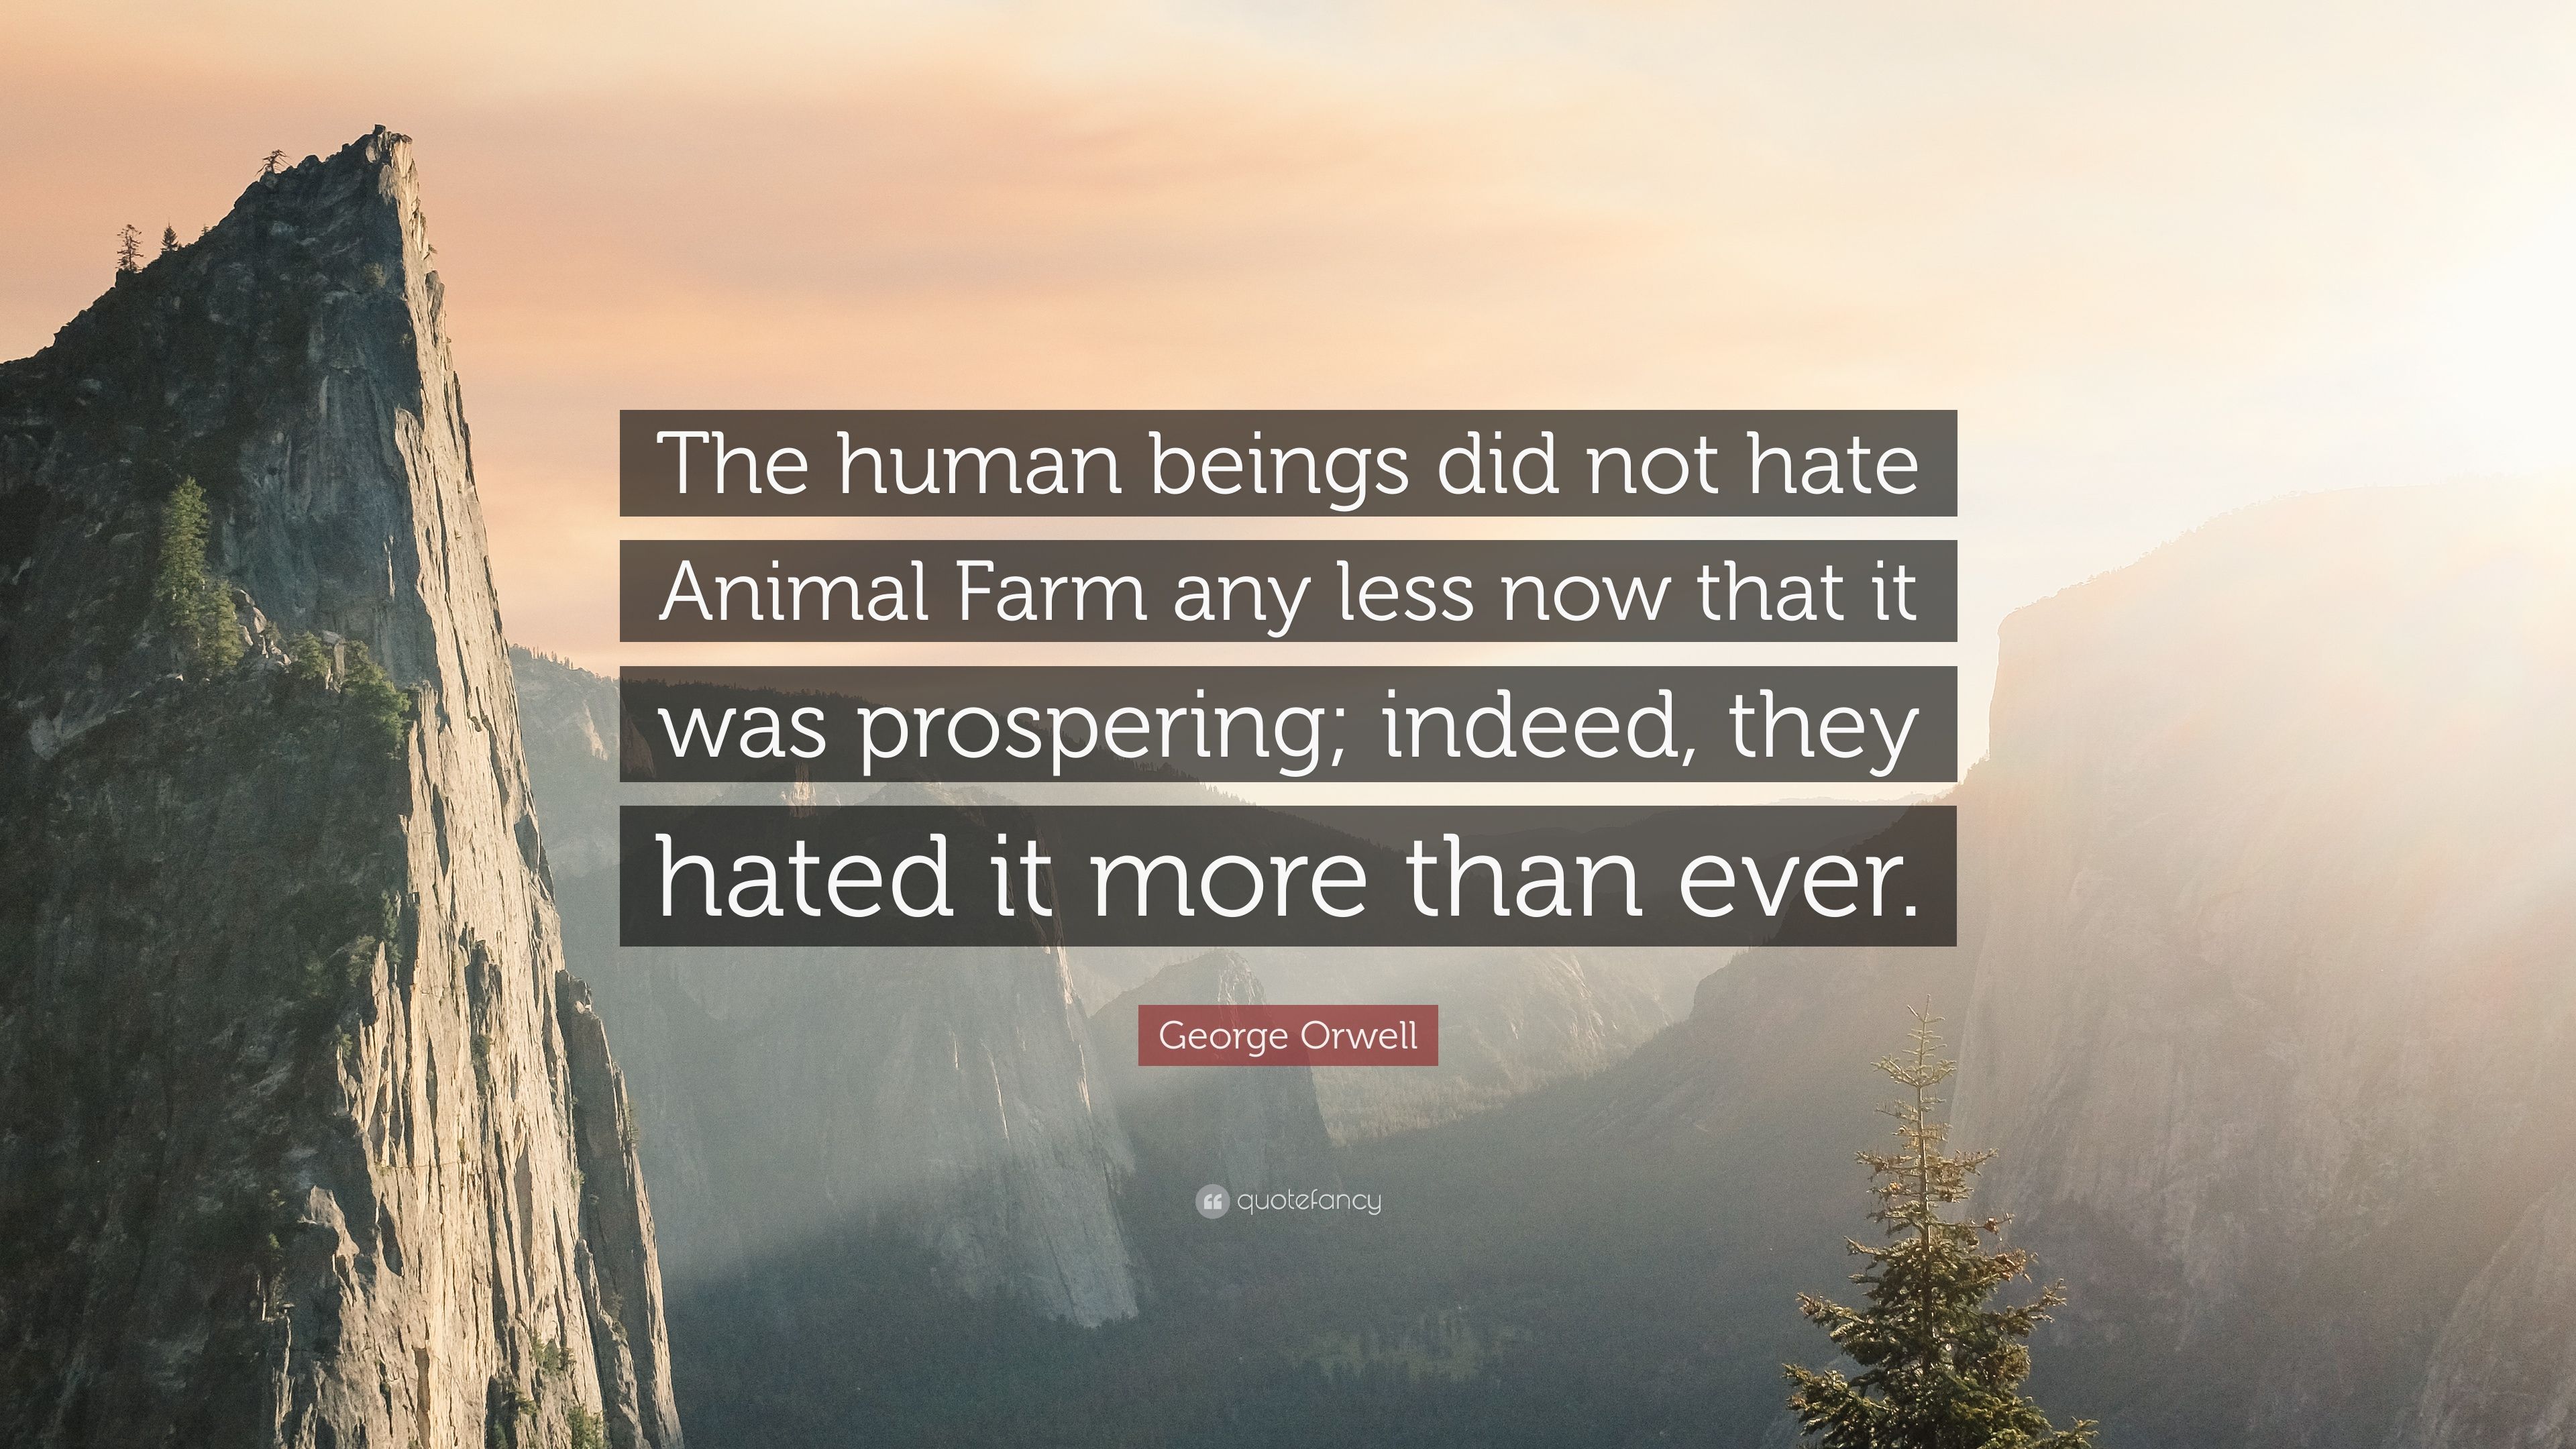 George Orwell Quote: “The human beings did not hate Animal Farm any less now that it was prospering; indeed, they hated it more than ever.” (10 wallpaper)